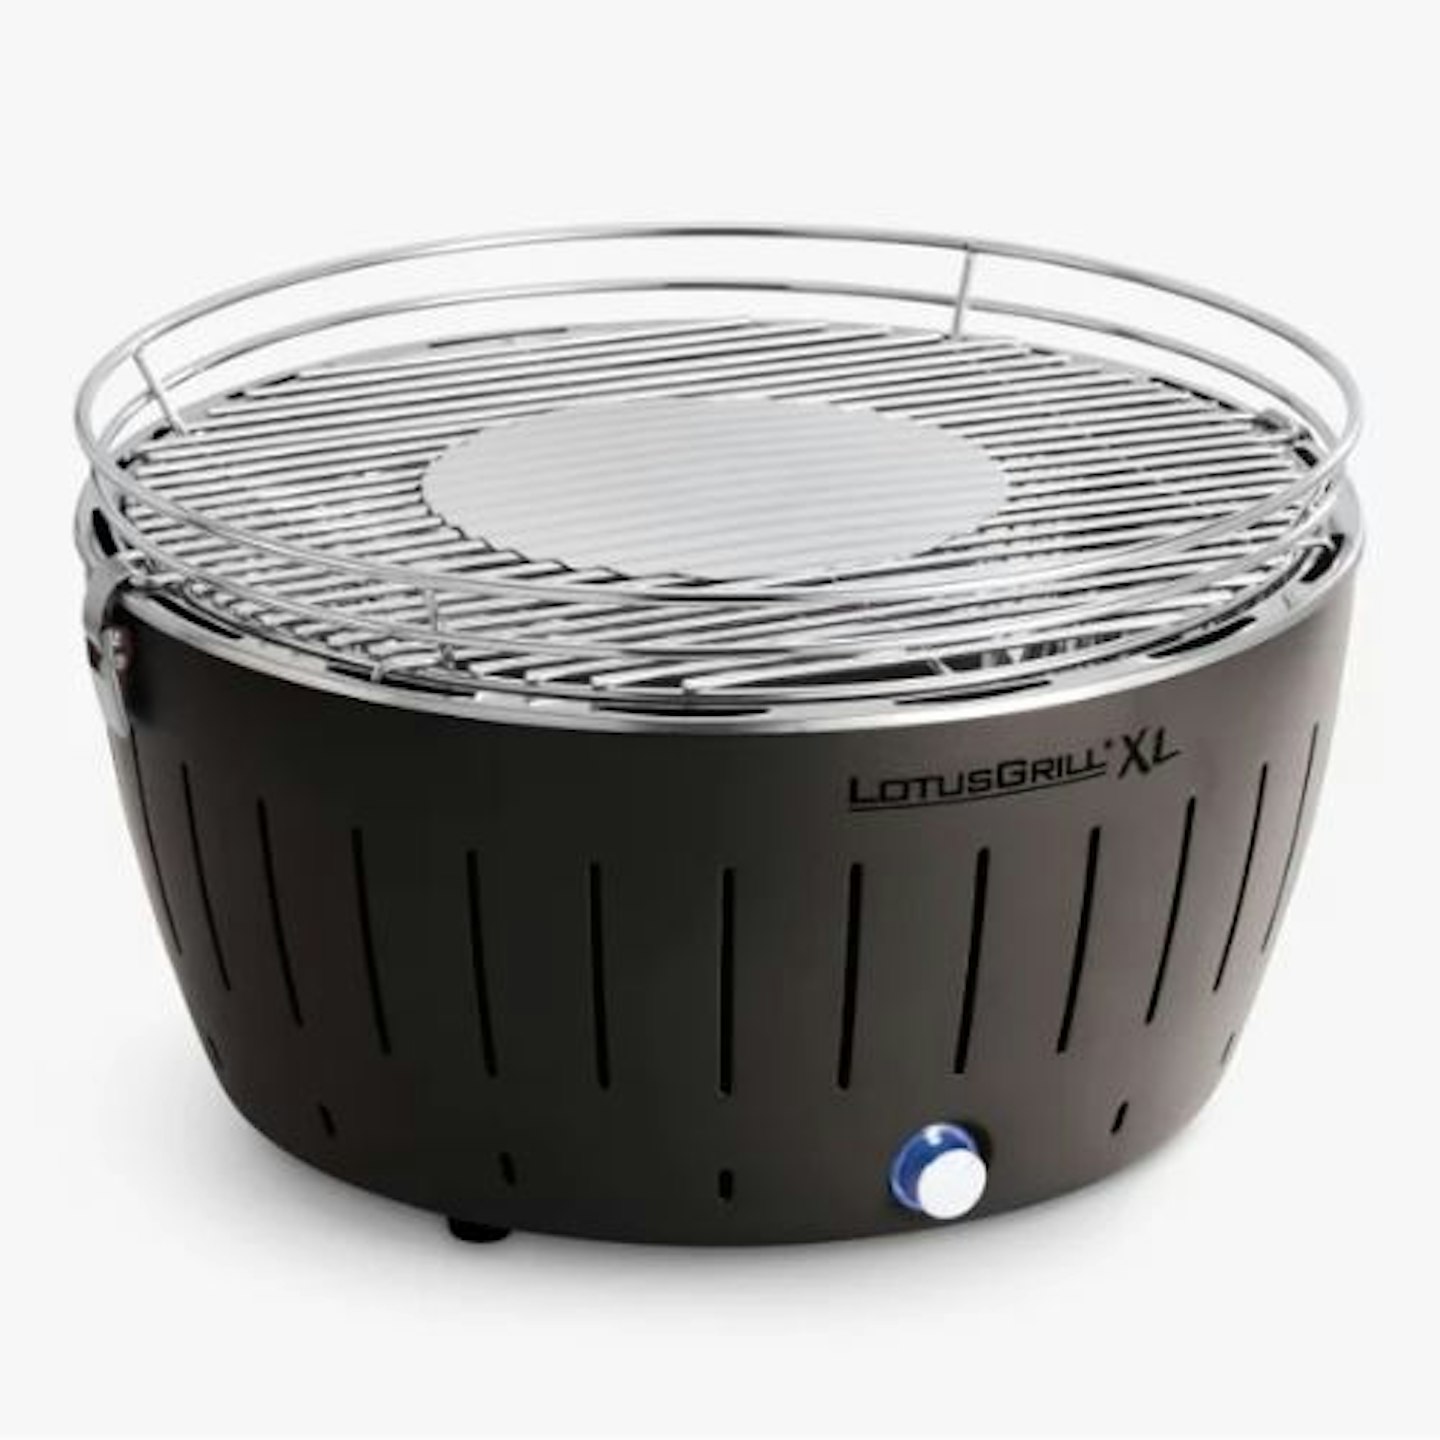 LotusGrill XL Portable Smokeless Charcoal Barbecue